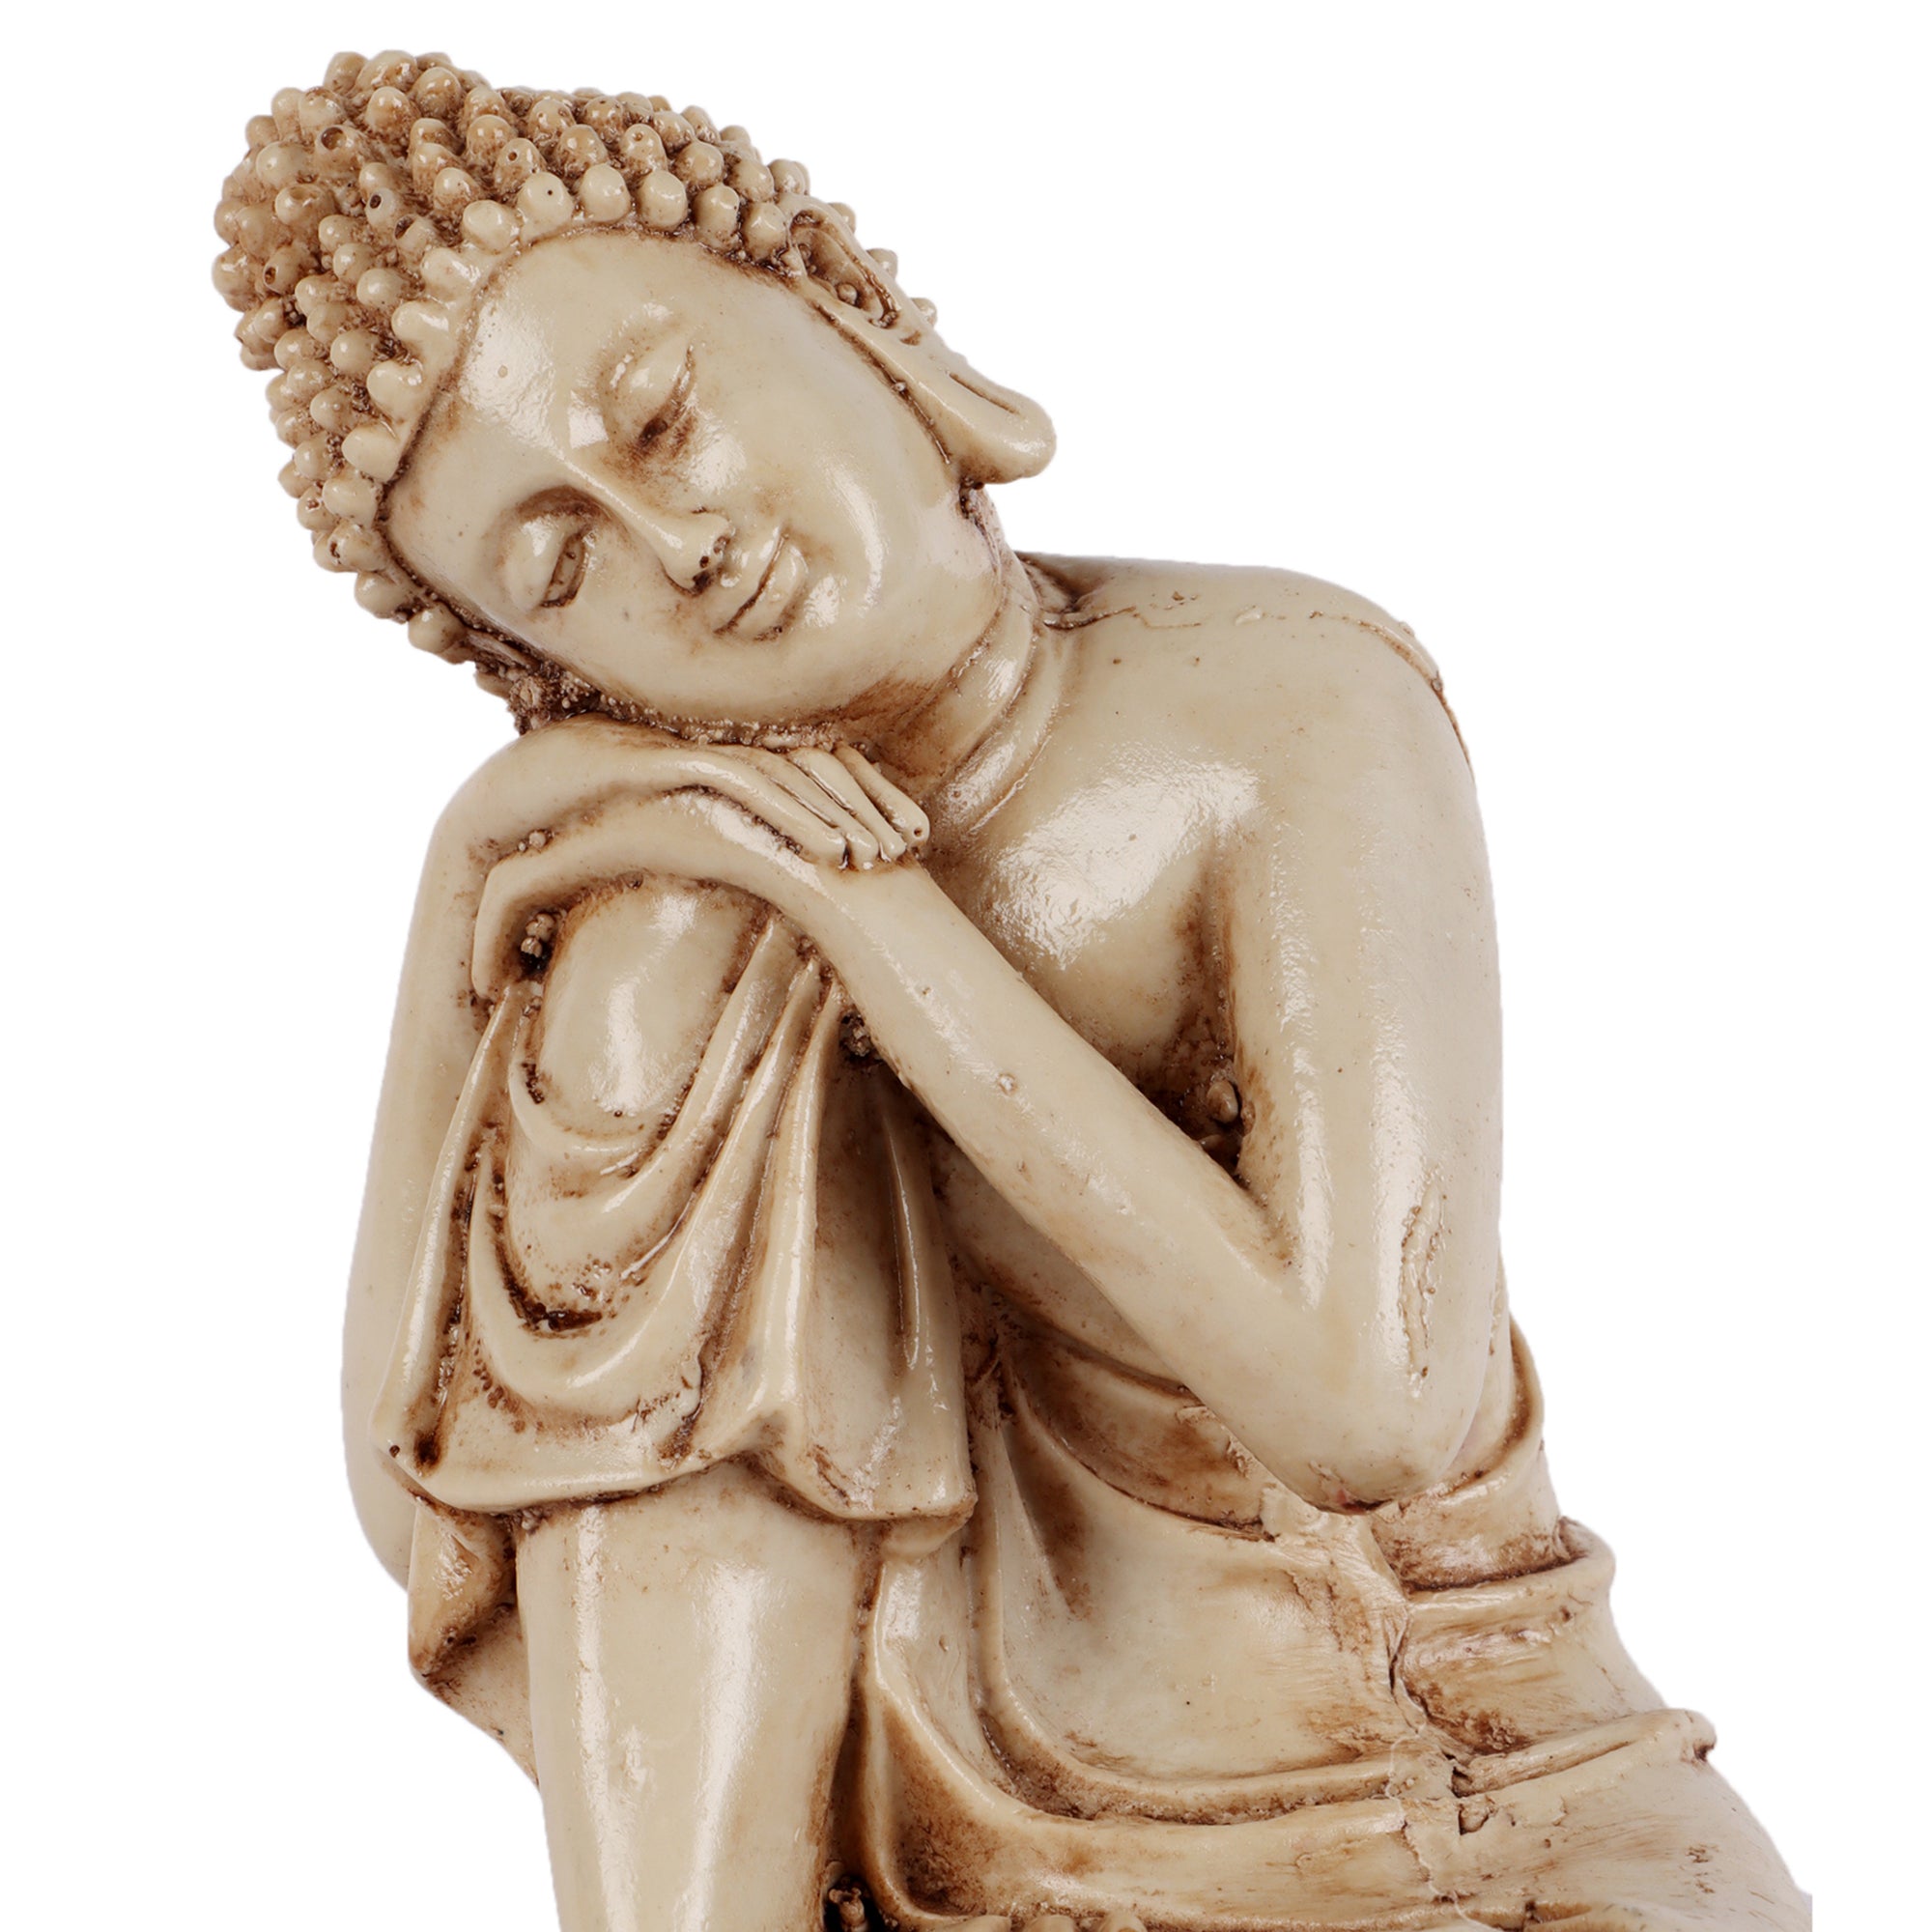 Can we give buddha statue as gift?